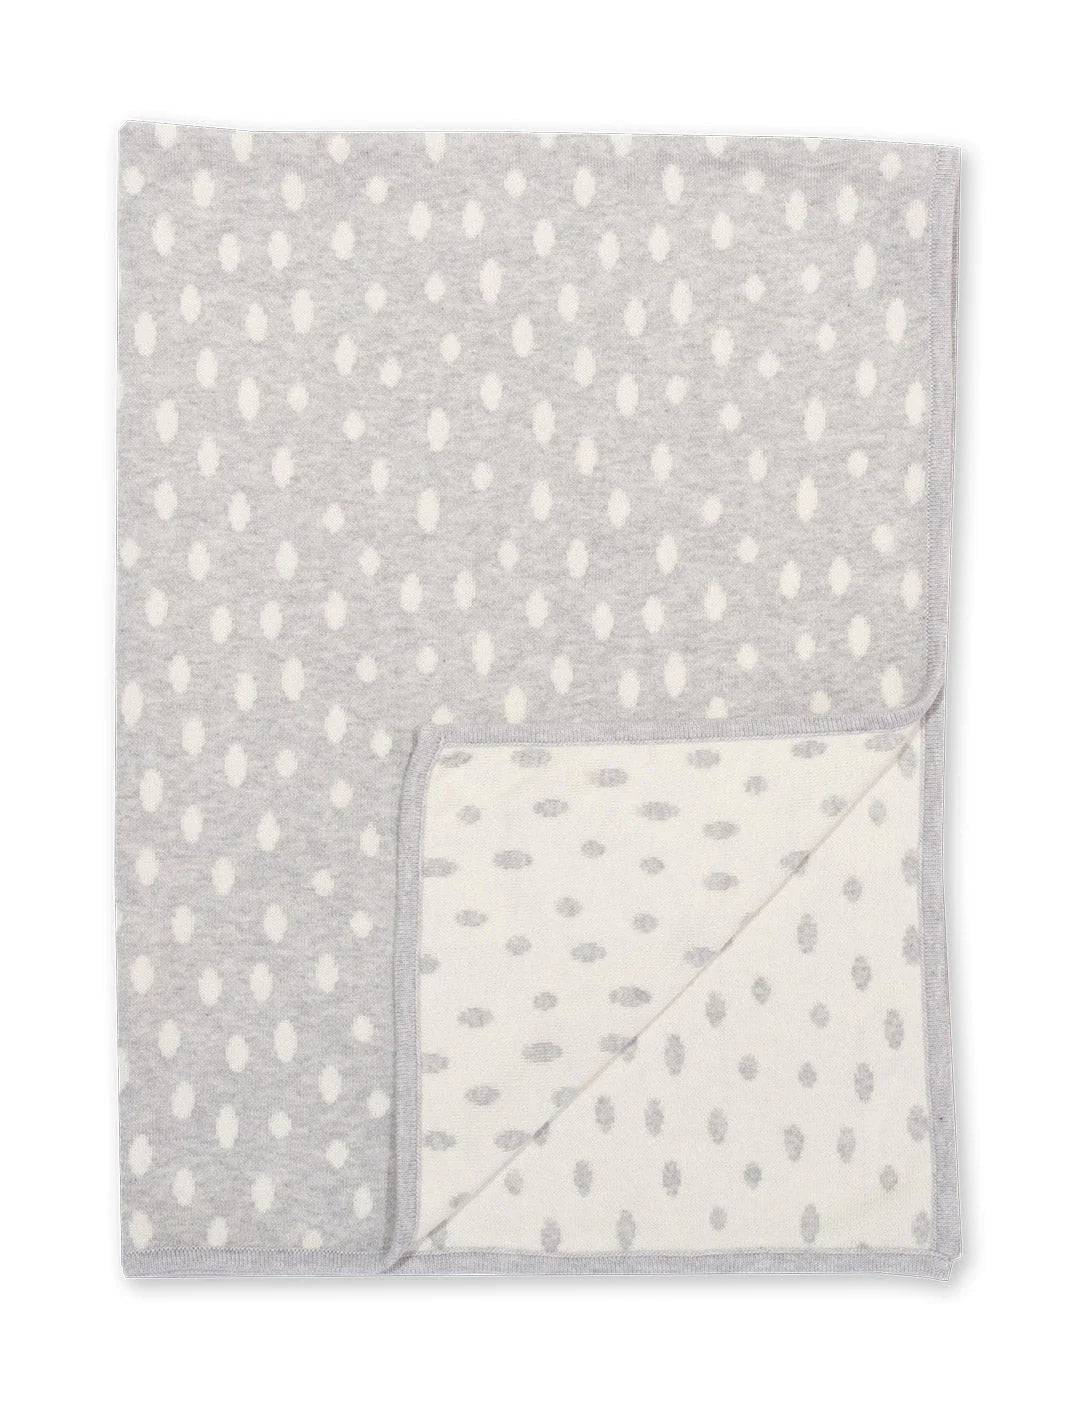 A grey and white GOTS certified organic cotton baby blanket.